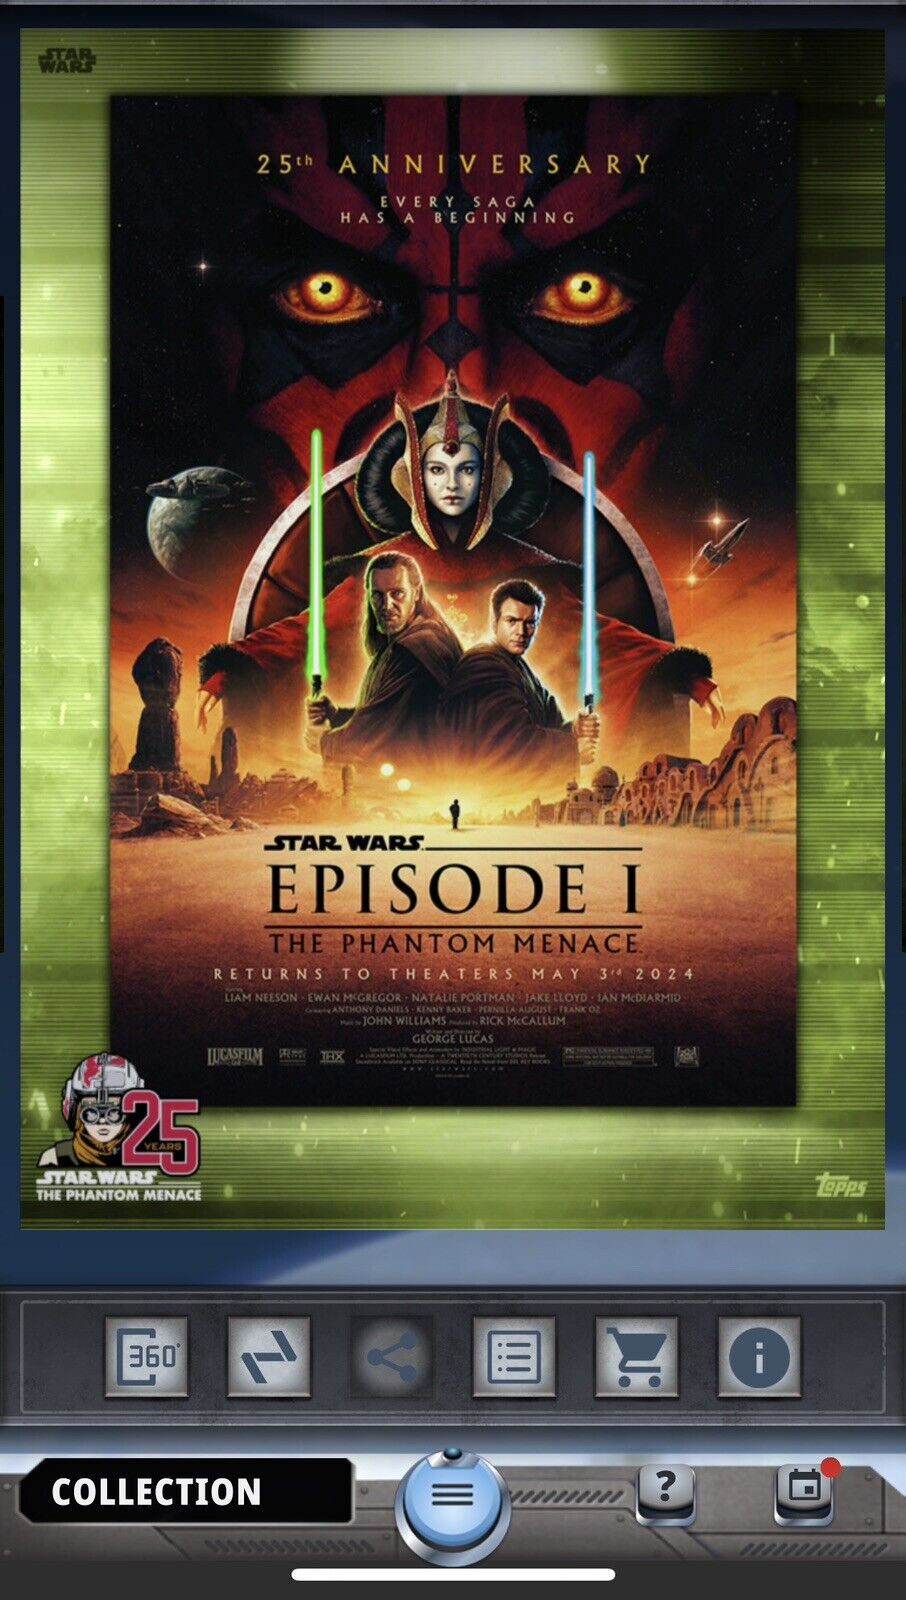 THE PHANTOM MENACE 25th ANNIVERSRY EPIC+SR+R POSTERS-TOPPS STAR WARS CARD TRADER